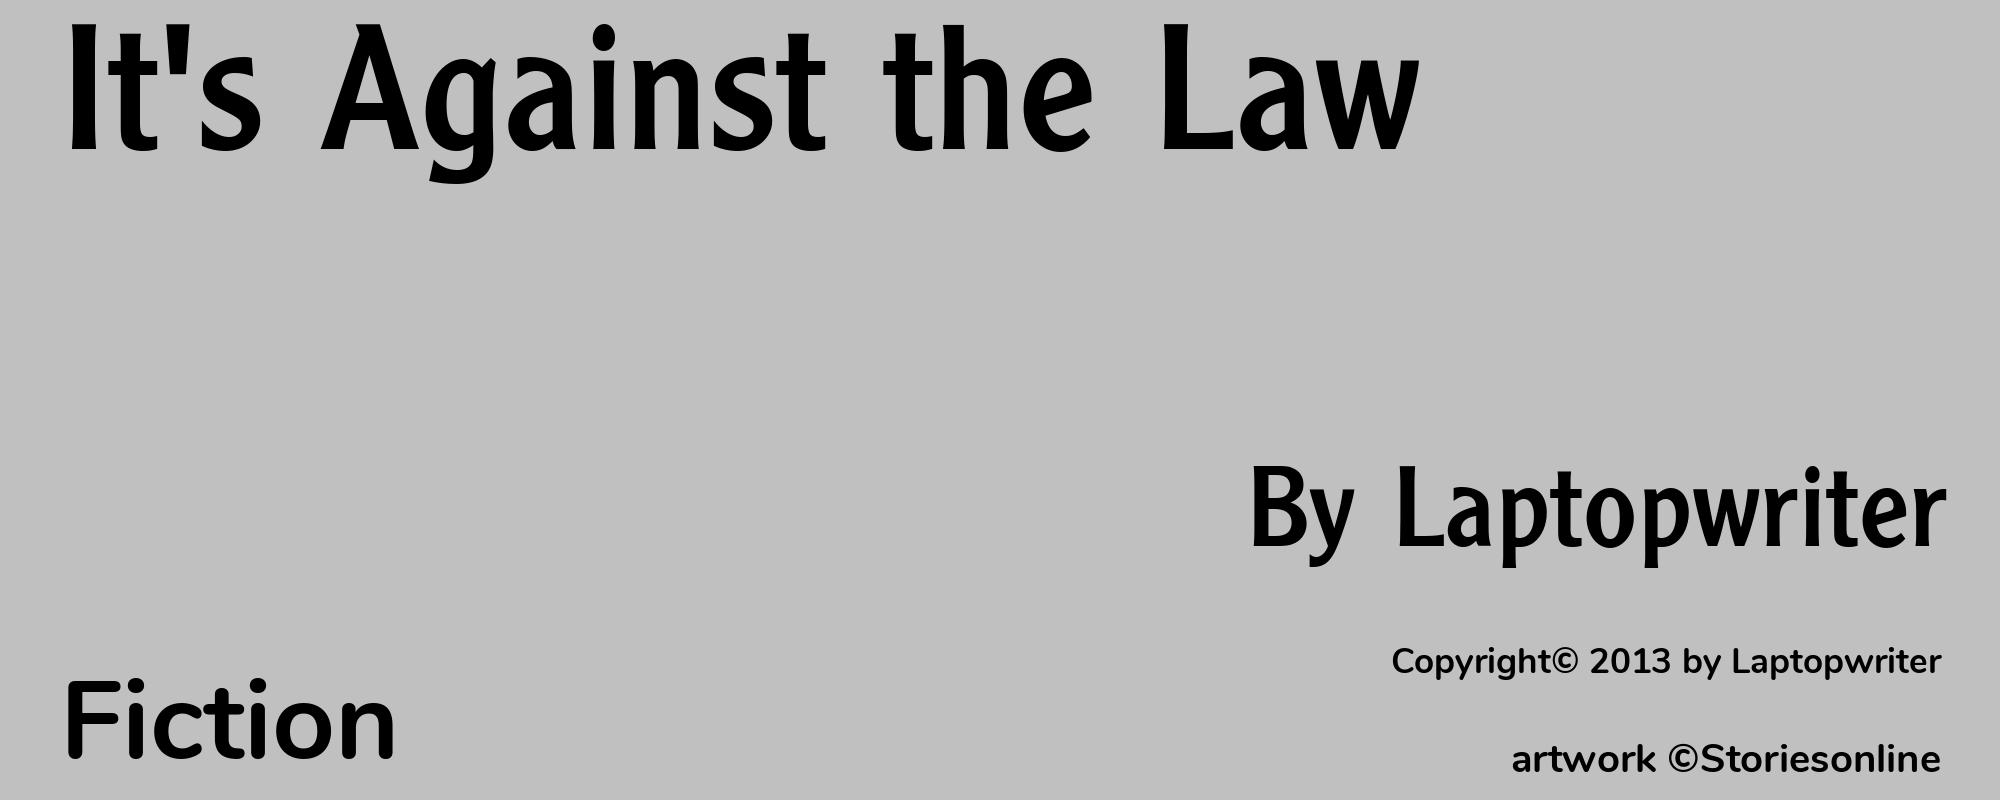 It's Against the Law - Cover